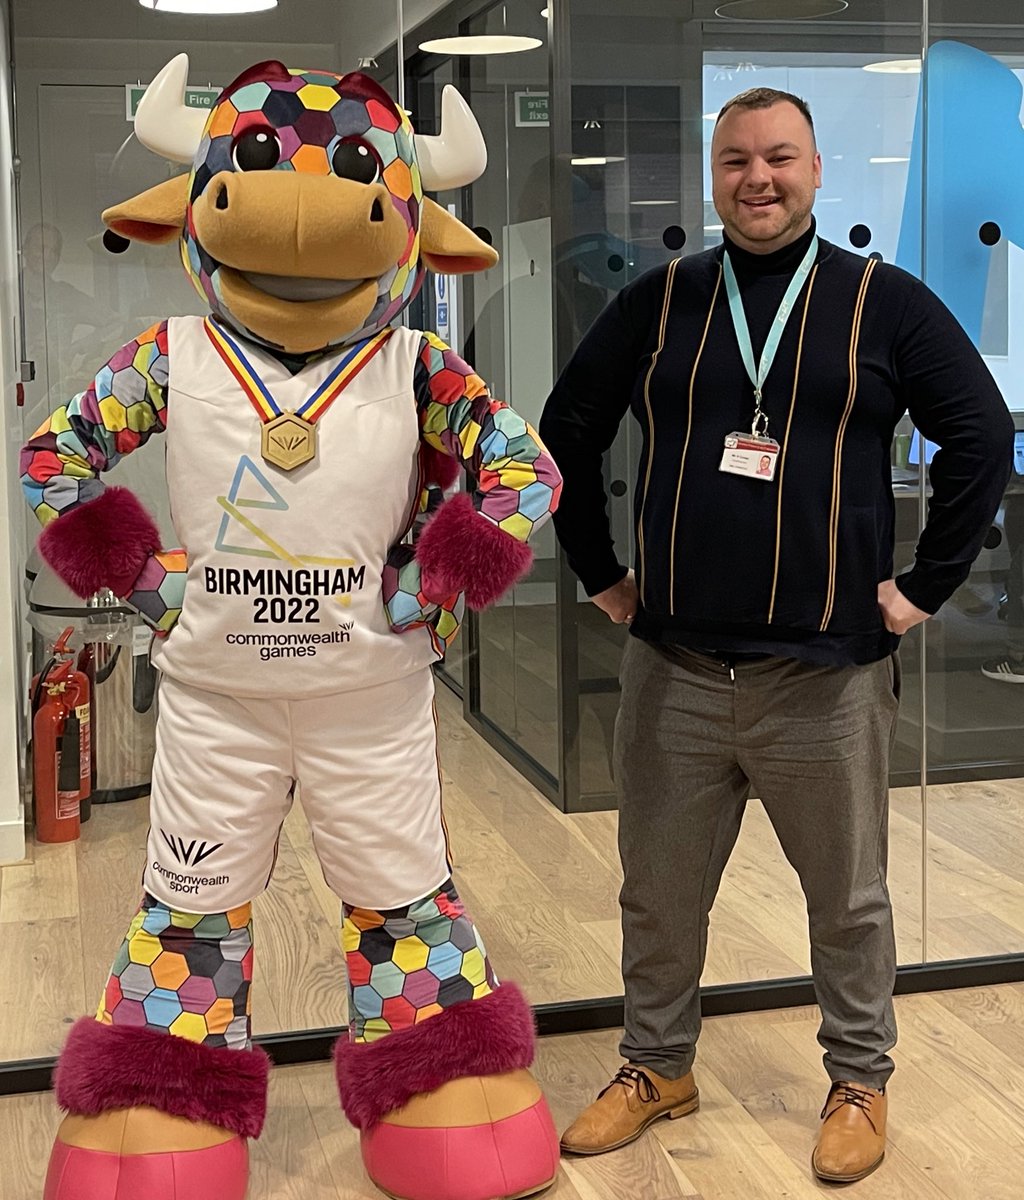 It was great to meet Perry at todays @birminghamcg22 HT reference group #PosewithPerry 🏅